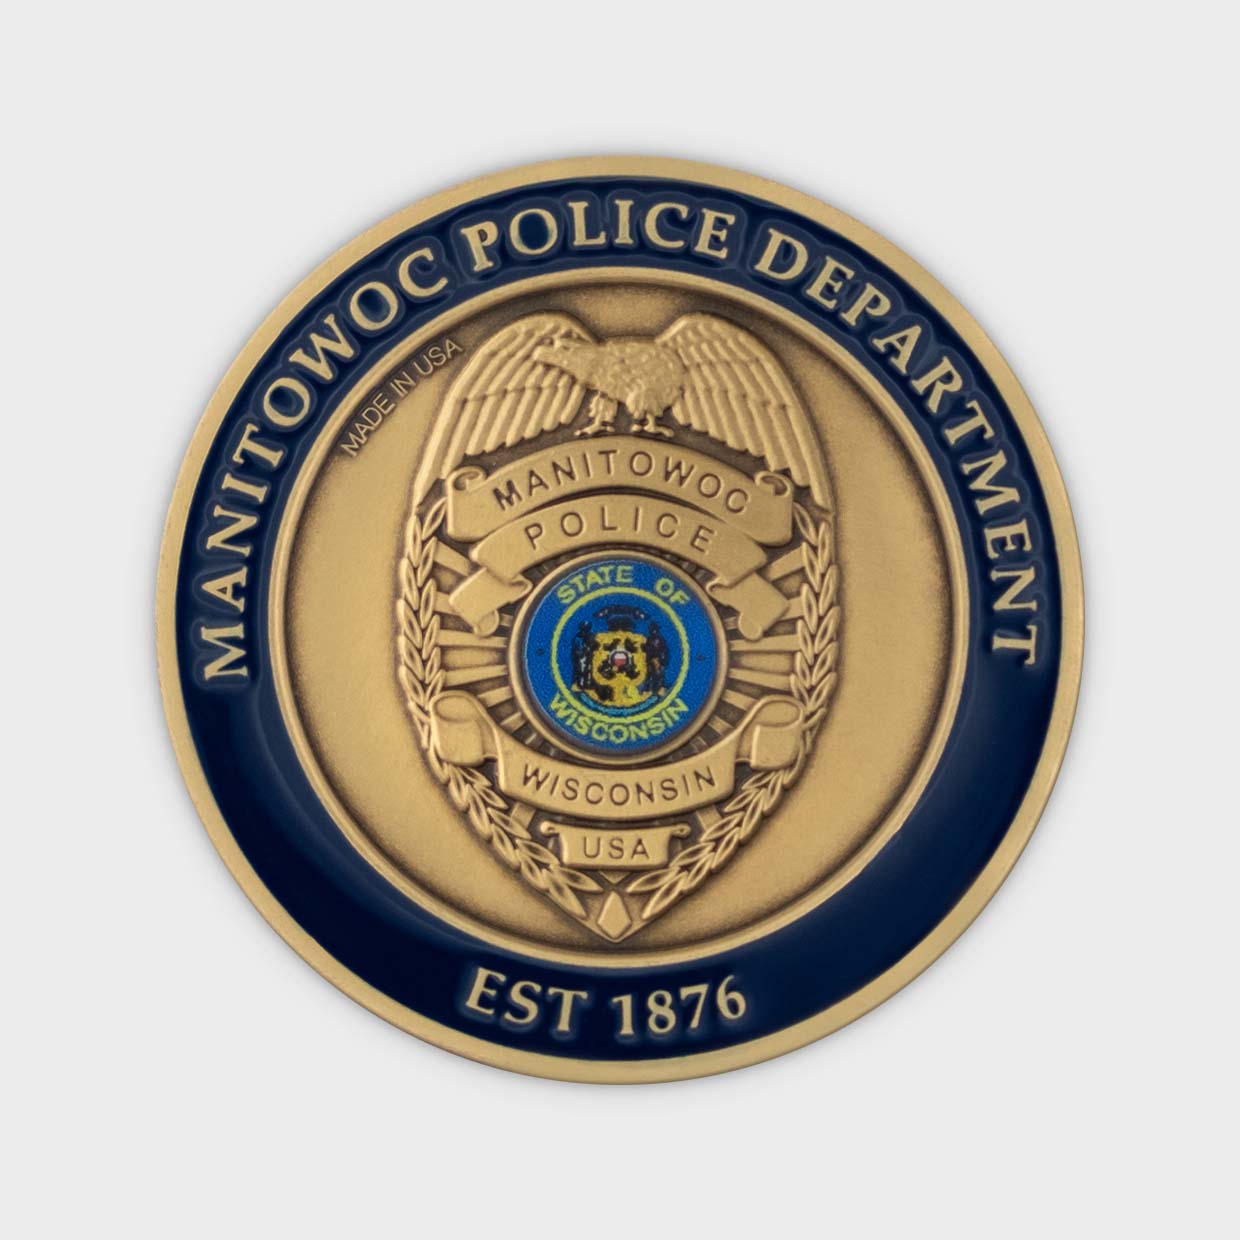 Manitowoc Police Department Coin Obverse